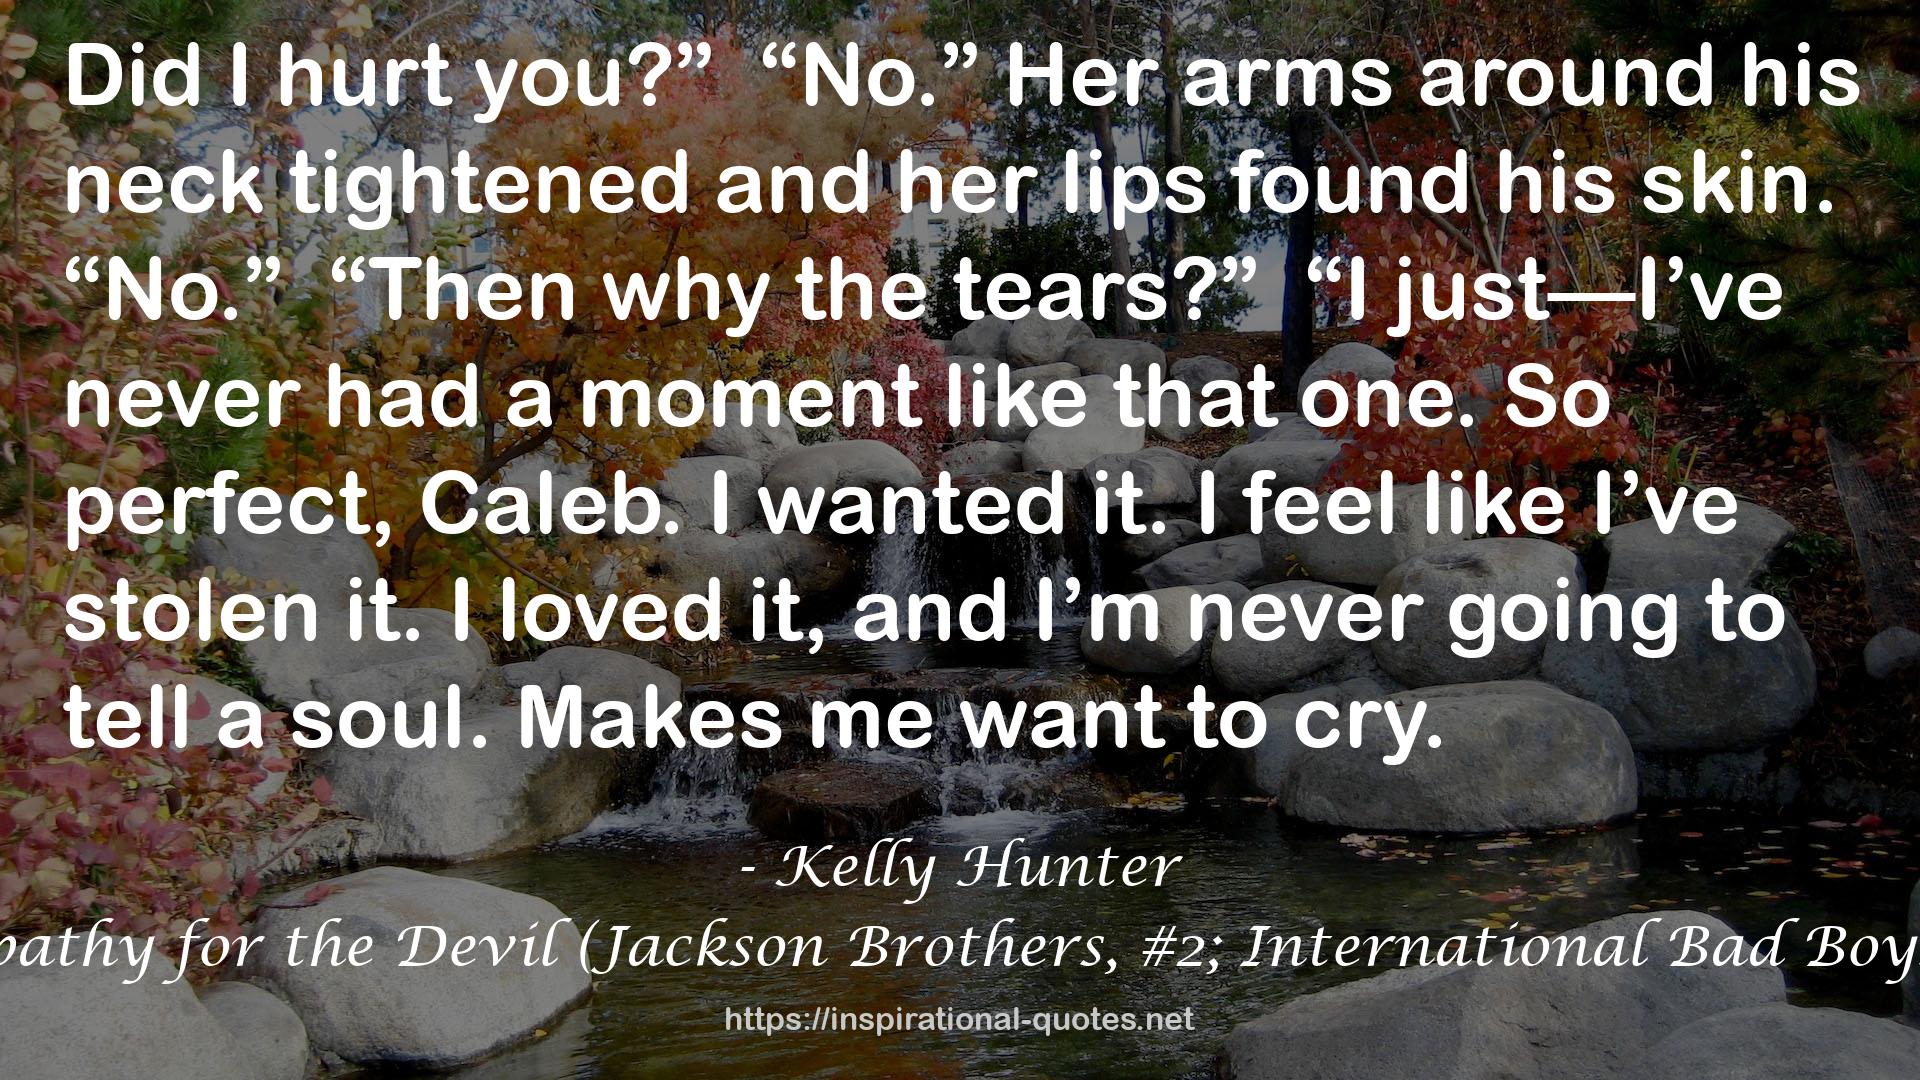 Sympathy for the Devil (Jackson Brothers, #2; International Bad Boys, #4) QUOTES